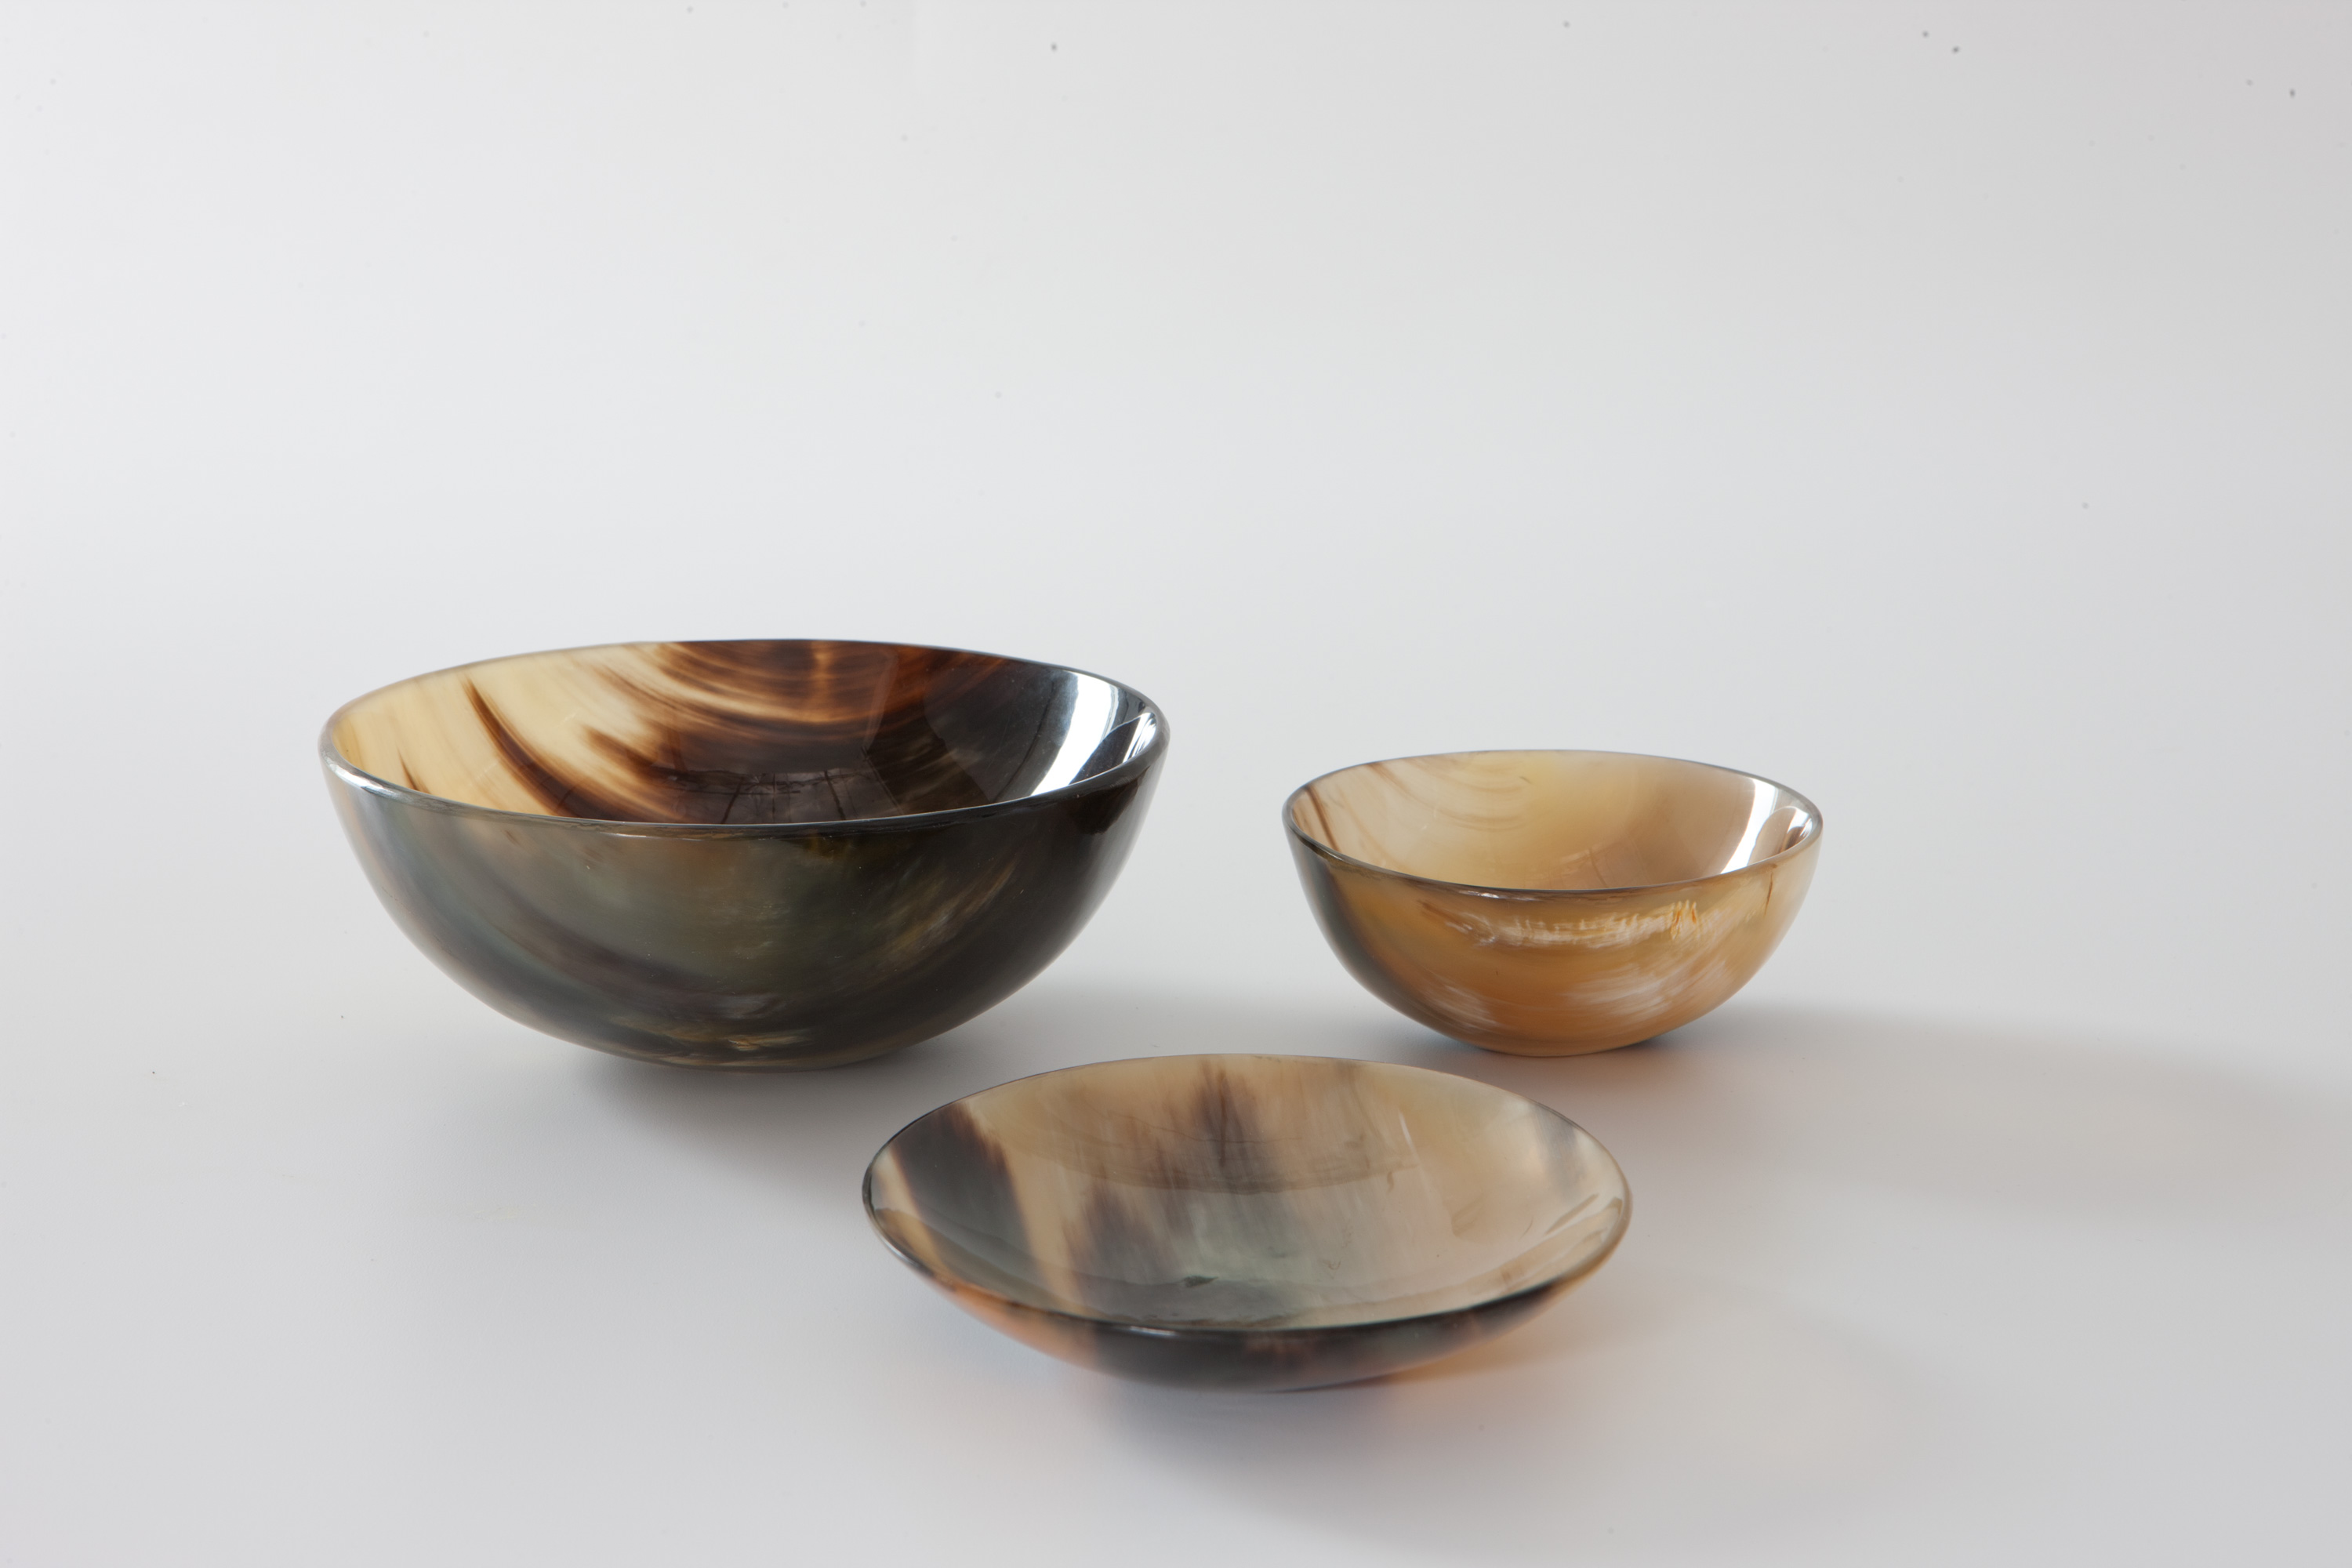 Some change bowls from AbbeyHorn. Each one features it's own unique marbling of creams and black.